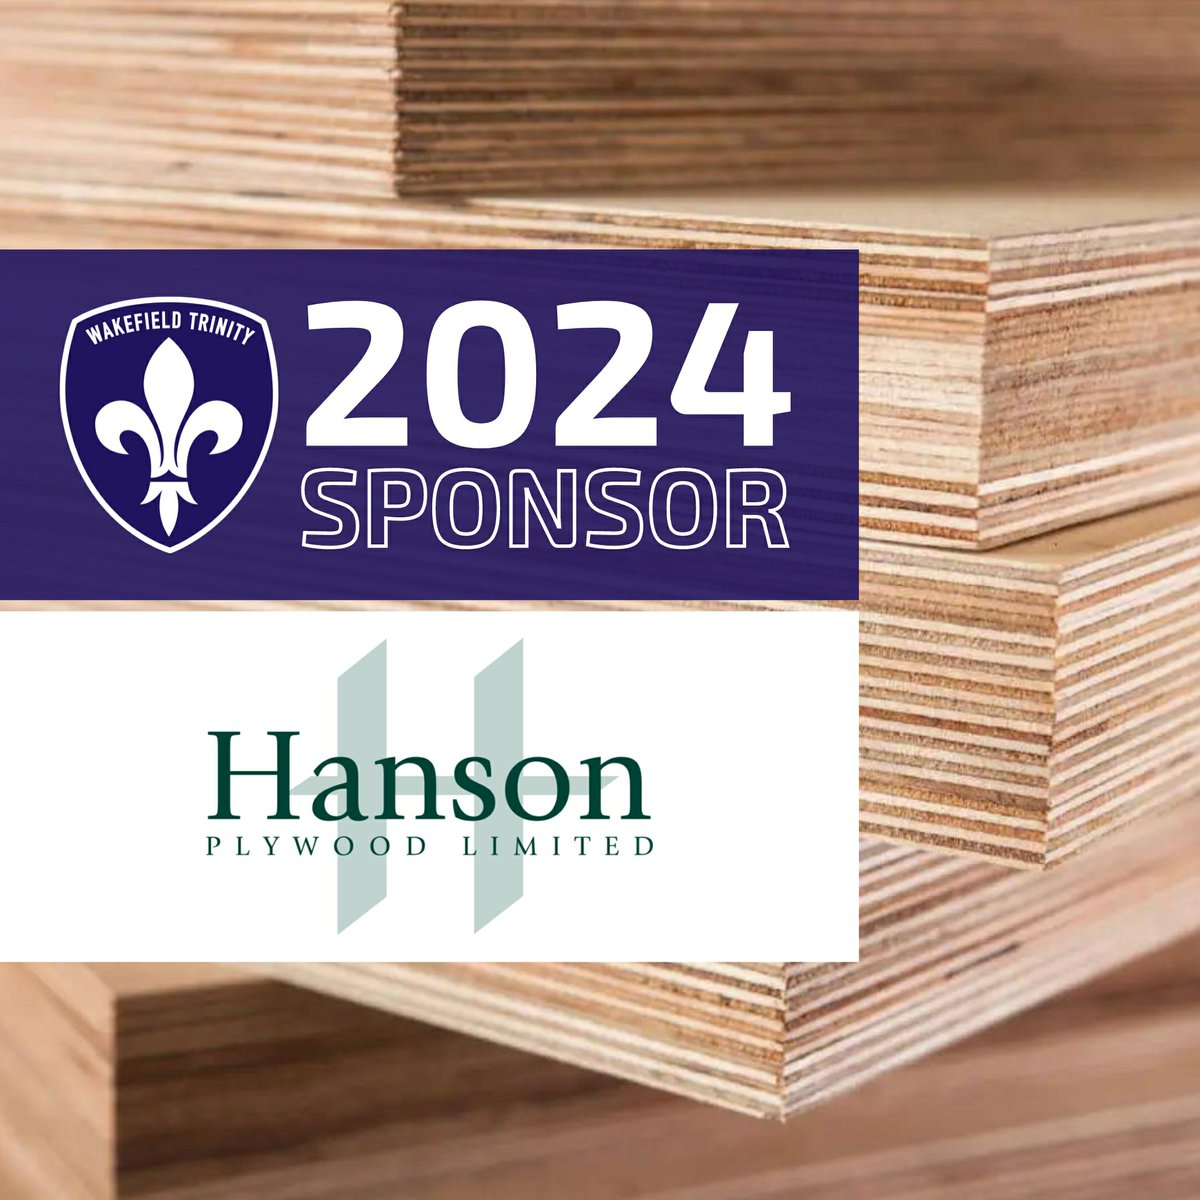 🌲 Thrilled to welcome @hansonplywood as sponsors for 2024! Specialists in wood-based panel products, their support is as strong as their plywood. Find out more at wakefieldtrinity.com/hanson-plywood… #TrinitySponsors #HansonPlywood 🔴⚪🔵